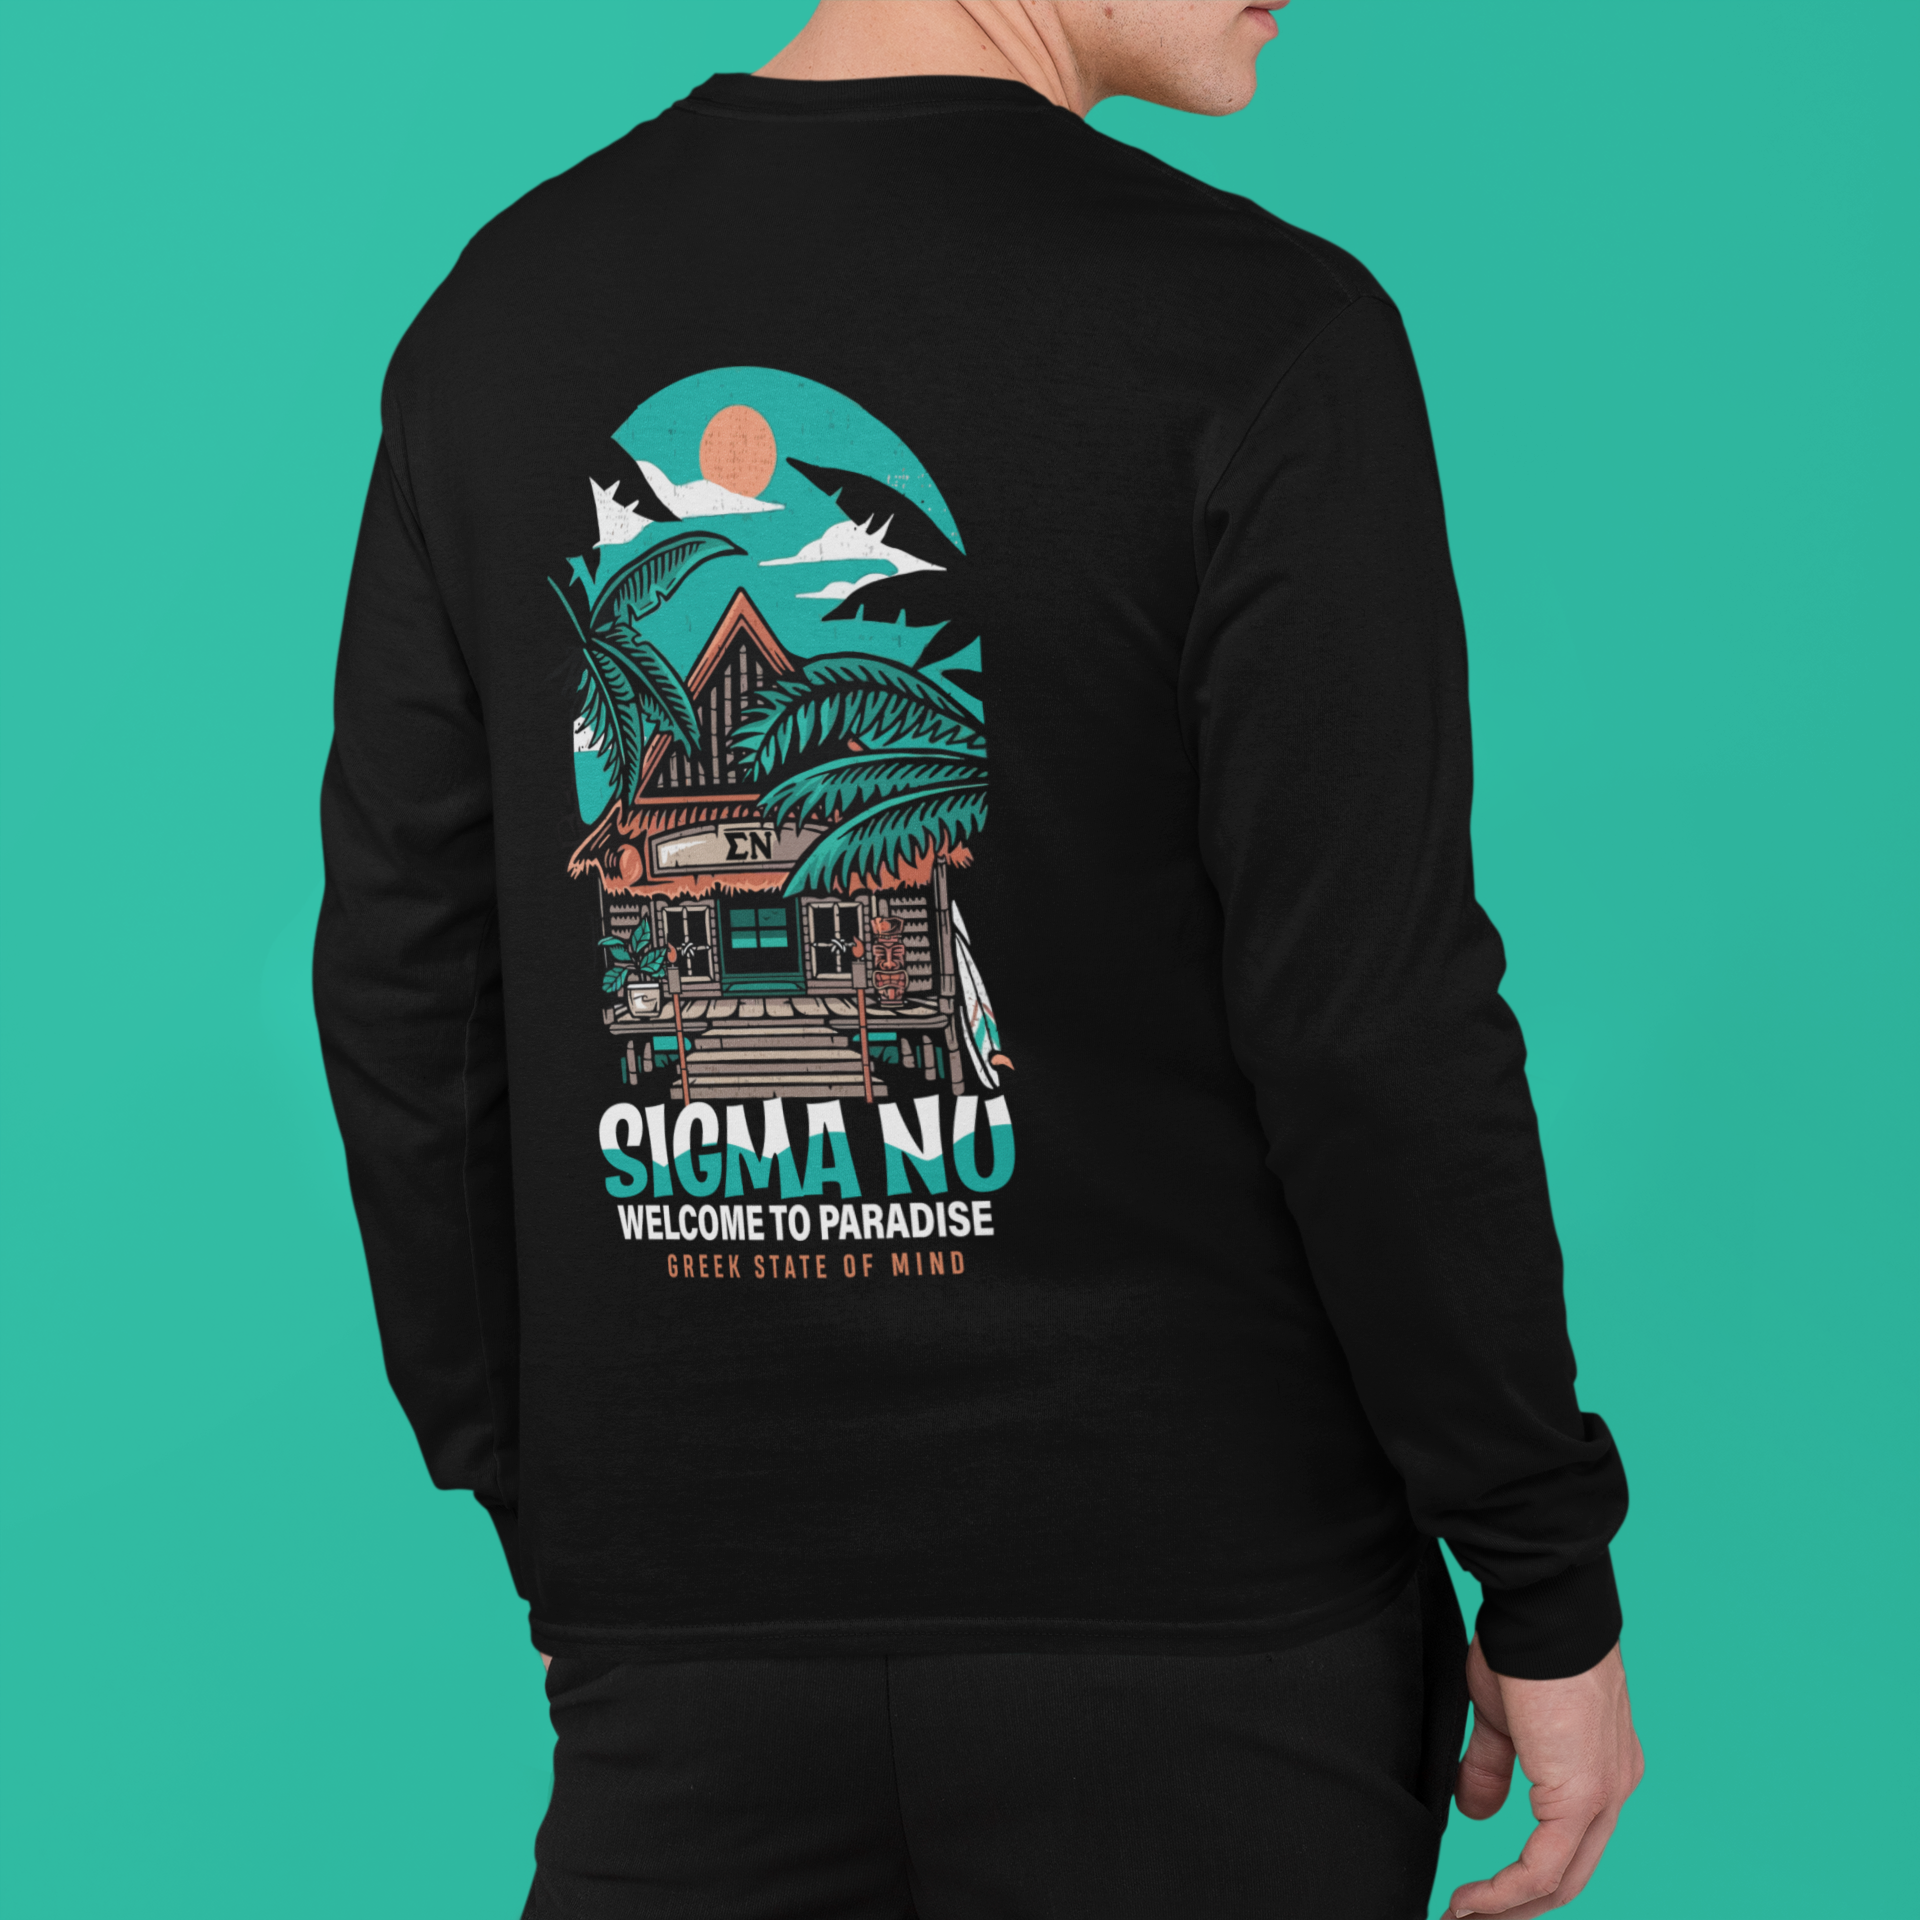 Black Sigma Nu Graphic Long Sleeve T-Shirt | Welcome to Paradise | Sigma Nu Clothing, Apparel and Merchandise model 